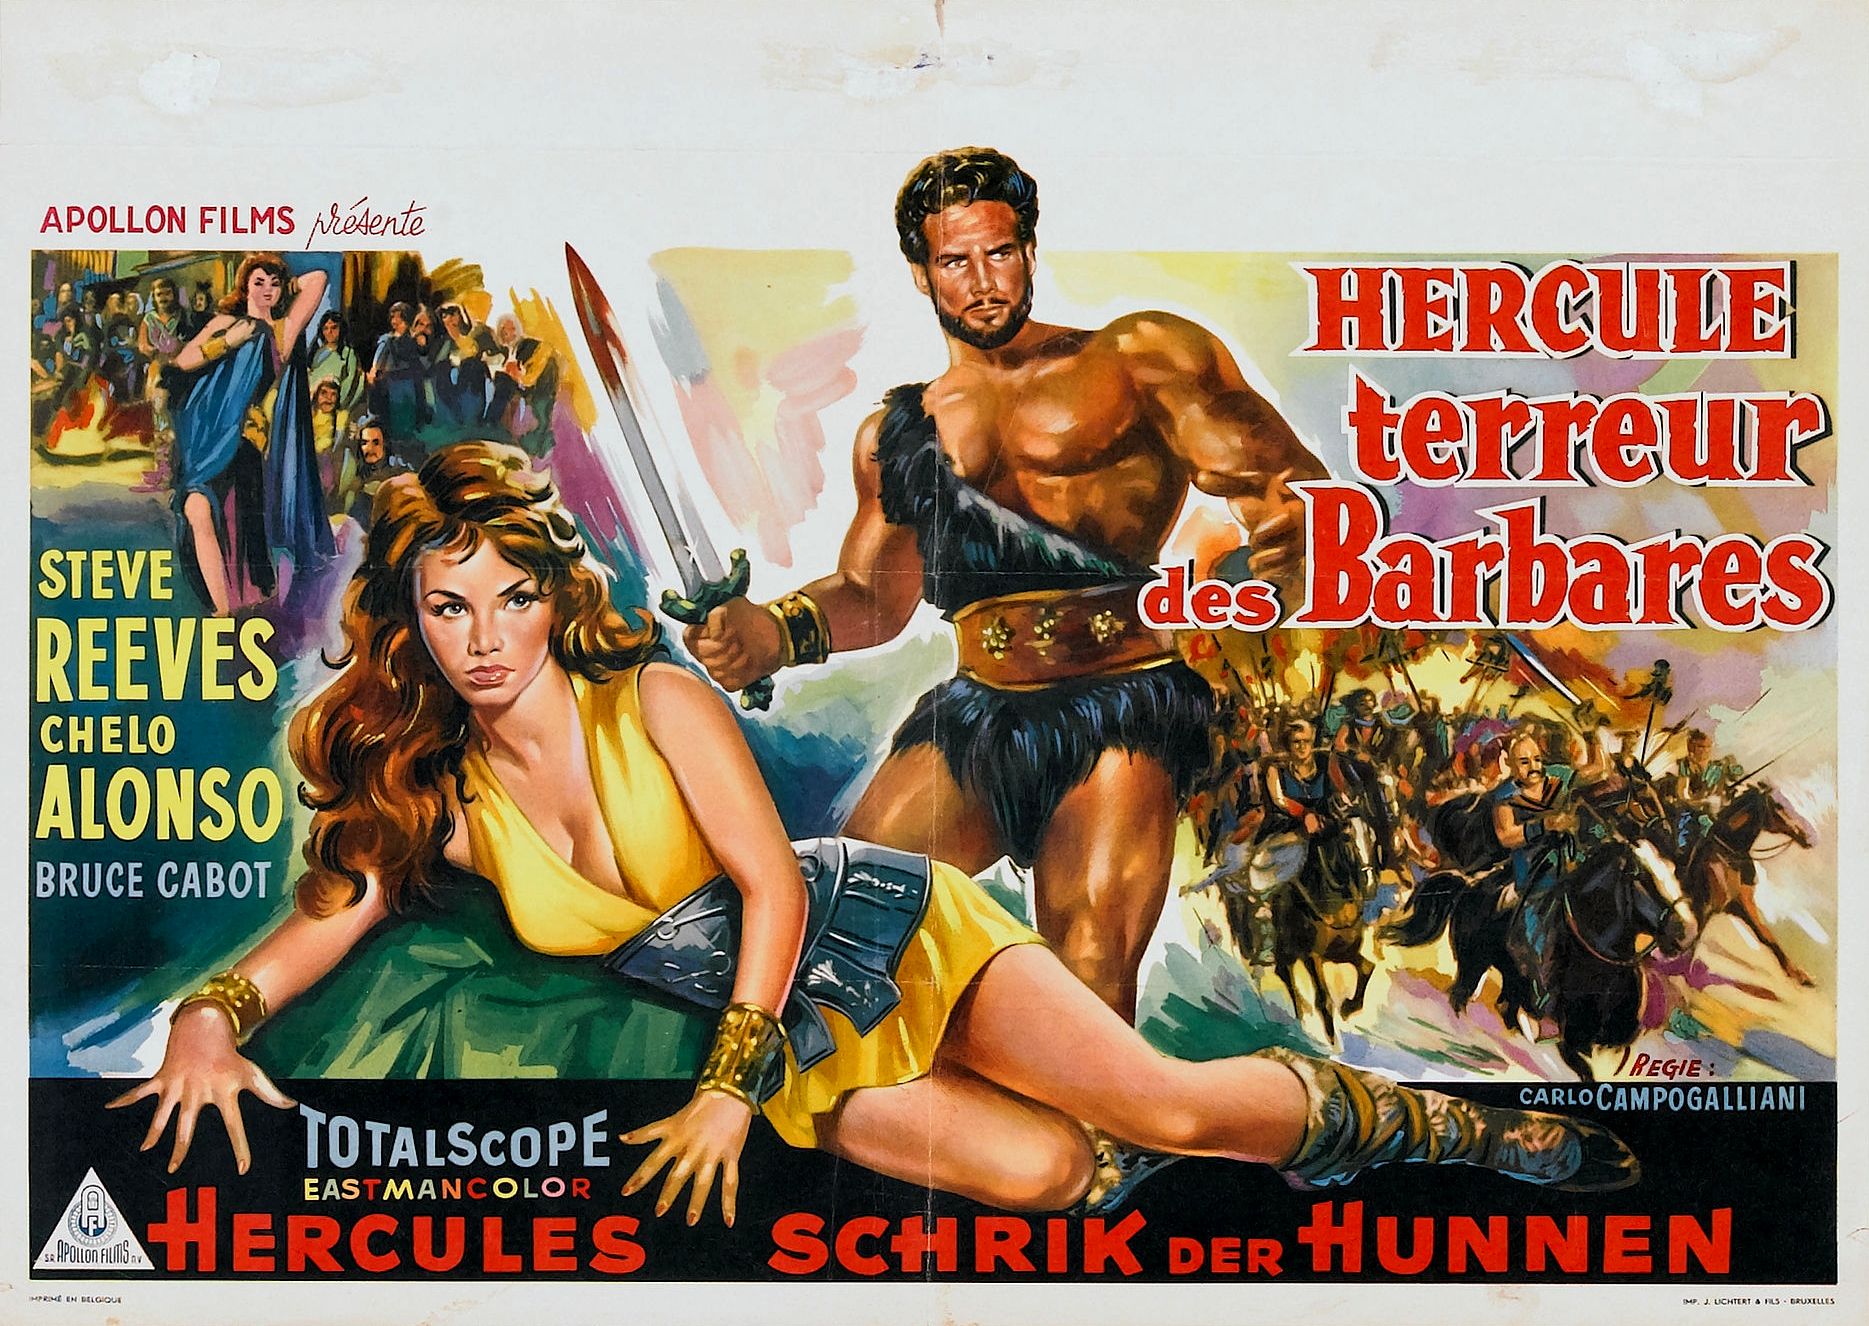 goliath_and_barbarians_poster_02